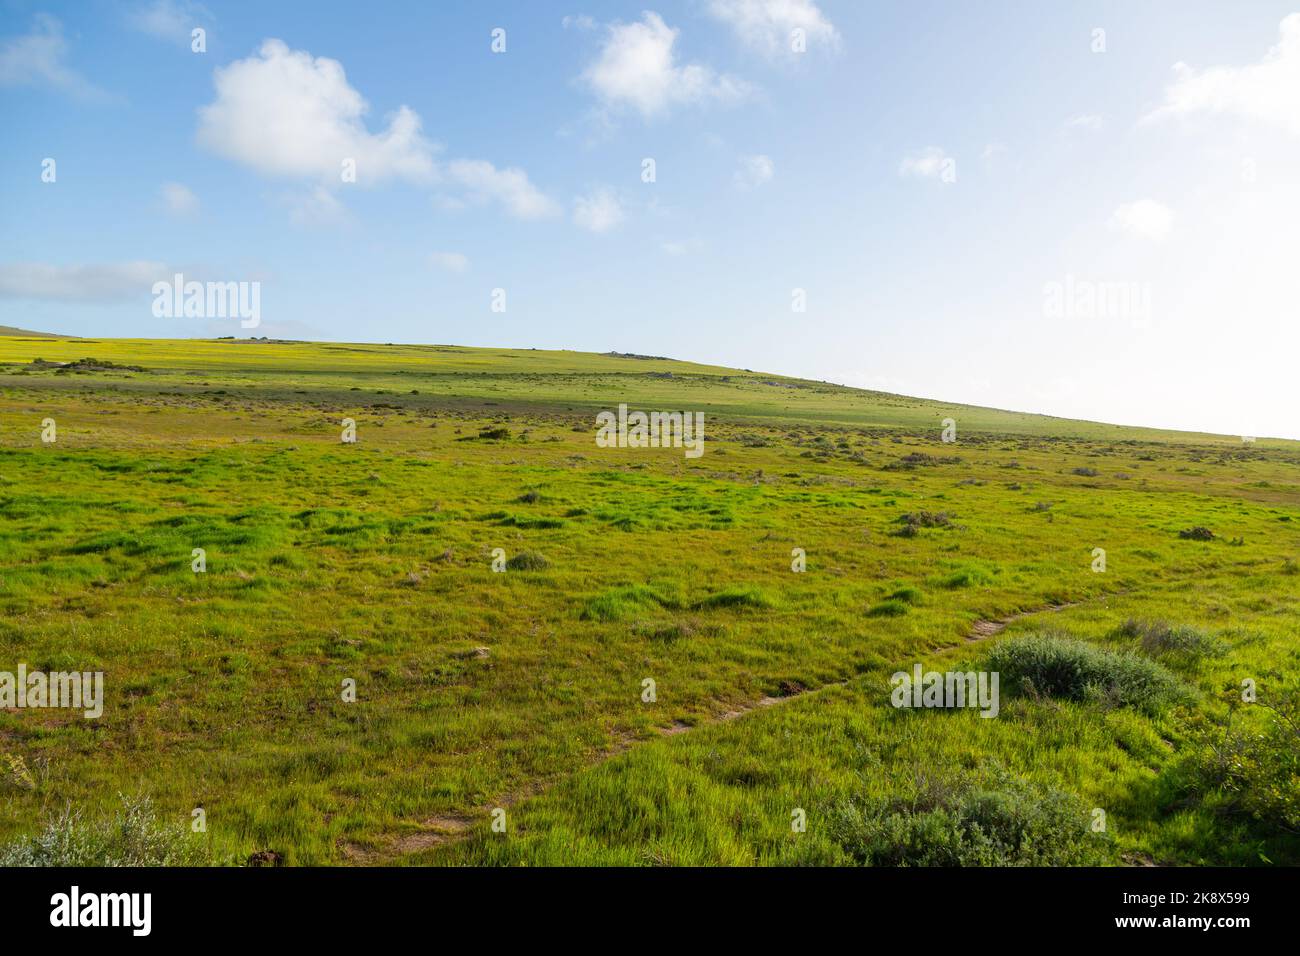 Landscape around the Town of Darling in the Western Cape of South Africa Stock Photo